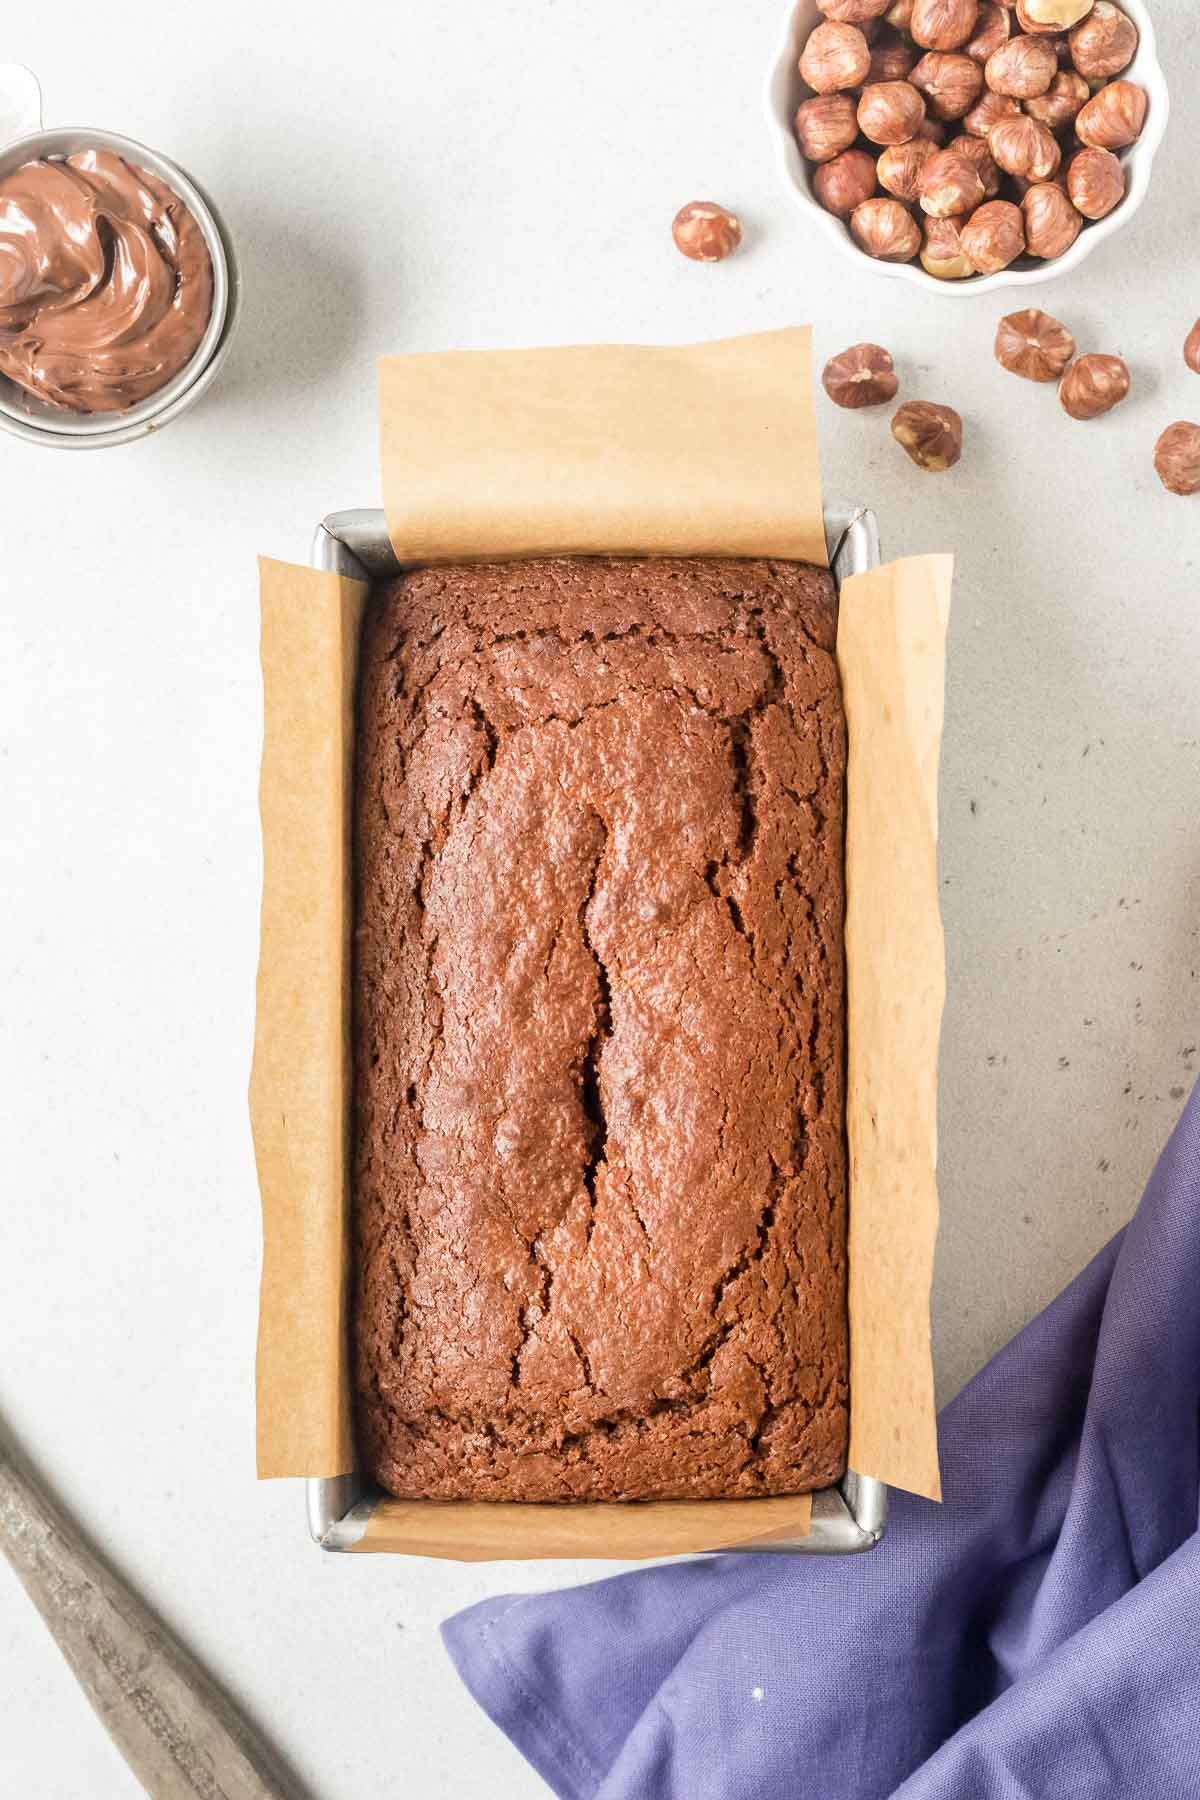 baked Nutella bread in a loaf pan